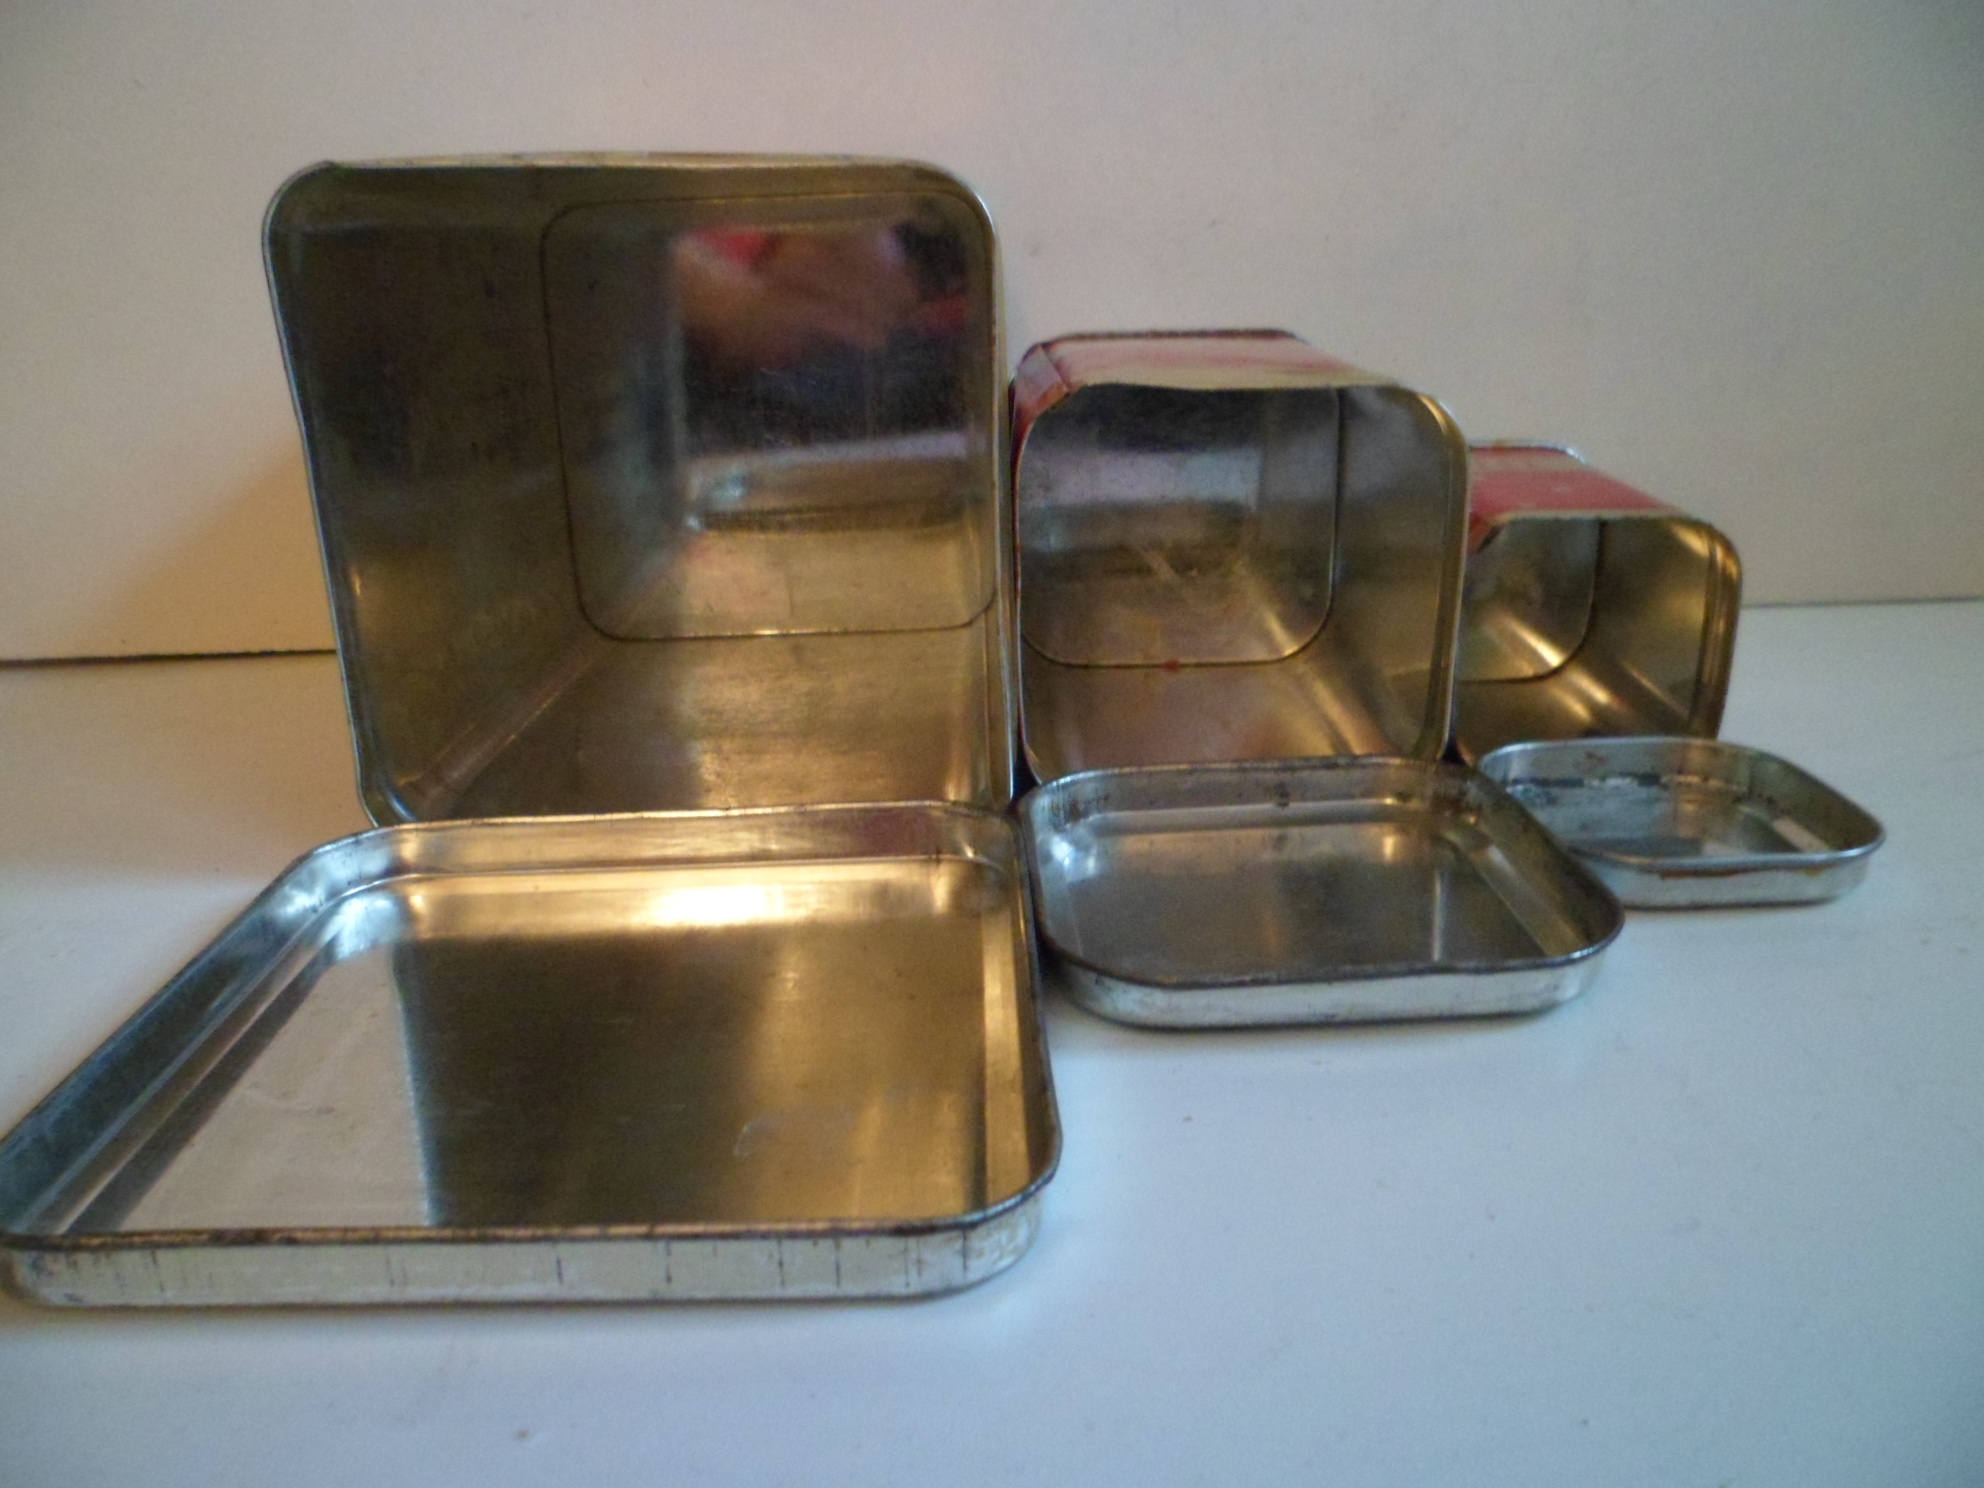 Set of 4 Vintage Tin Boxes Container Red and Gold Polka Dots Square Boxes  Antique Food Storage Kitchen Organization Soviet Metal Tin 